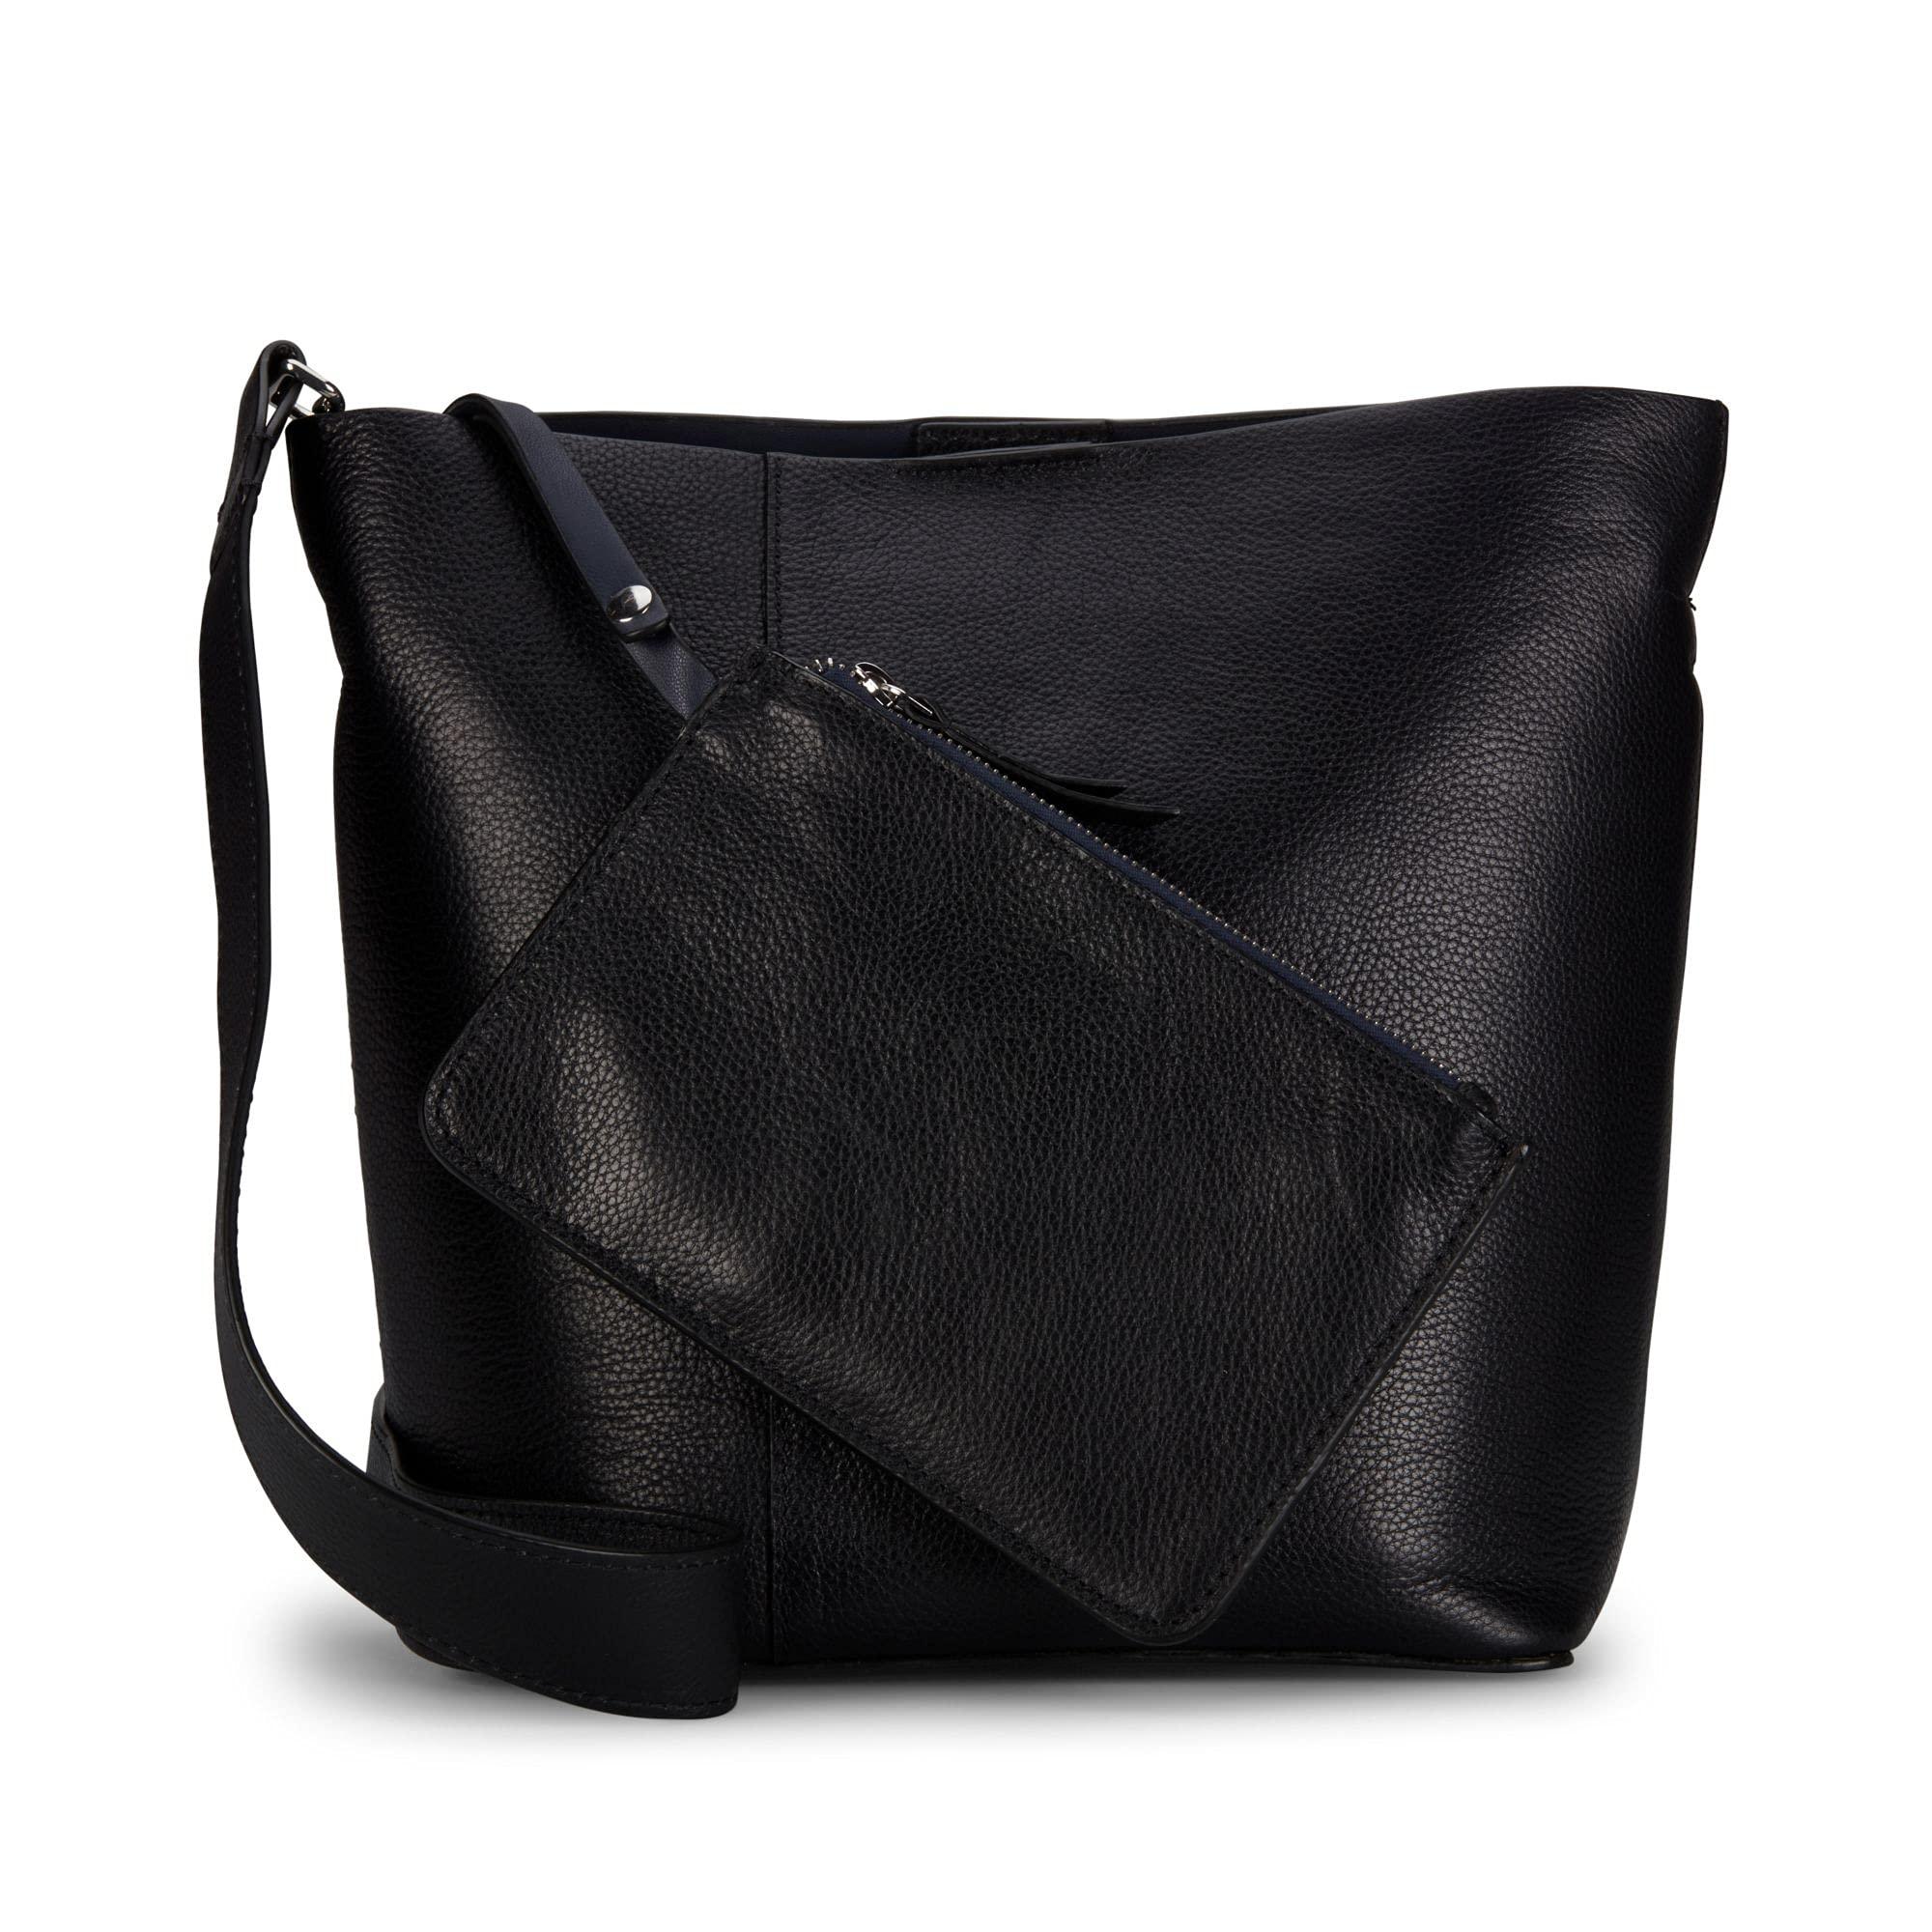 Clarks Topsham Bay Leather Accessories in Black | Lyst UK